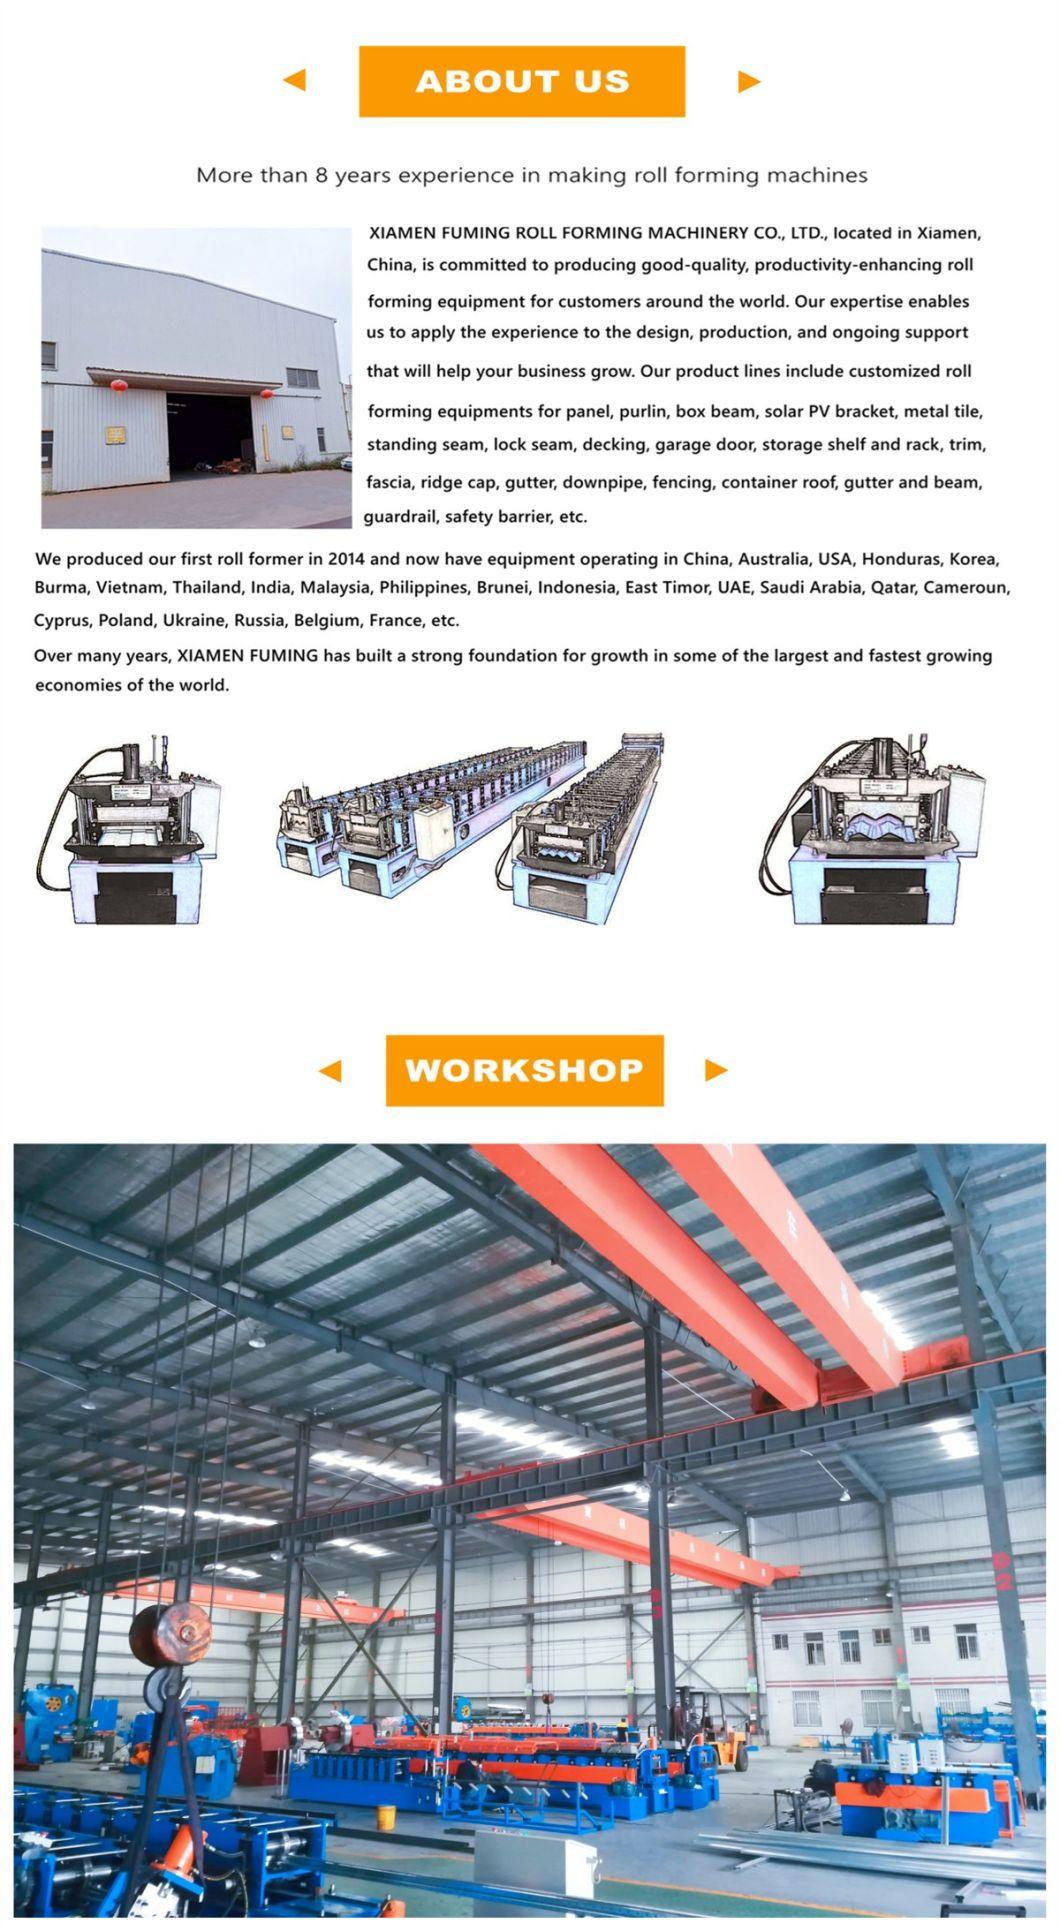 Downpipe, Downspout, Rainspout Gear/Sprocket, Gear Box or Toroidal Worm Down Pipe Forming Machine Roll Former